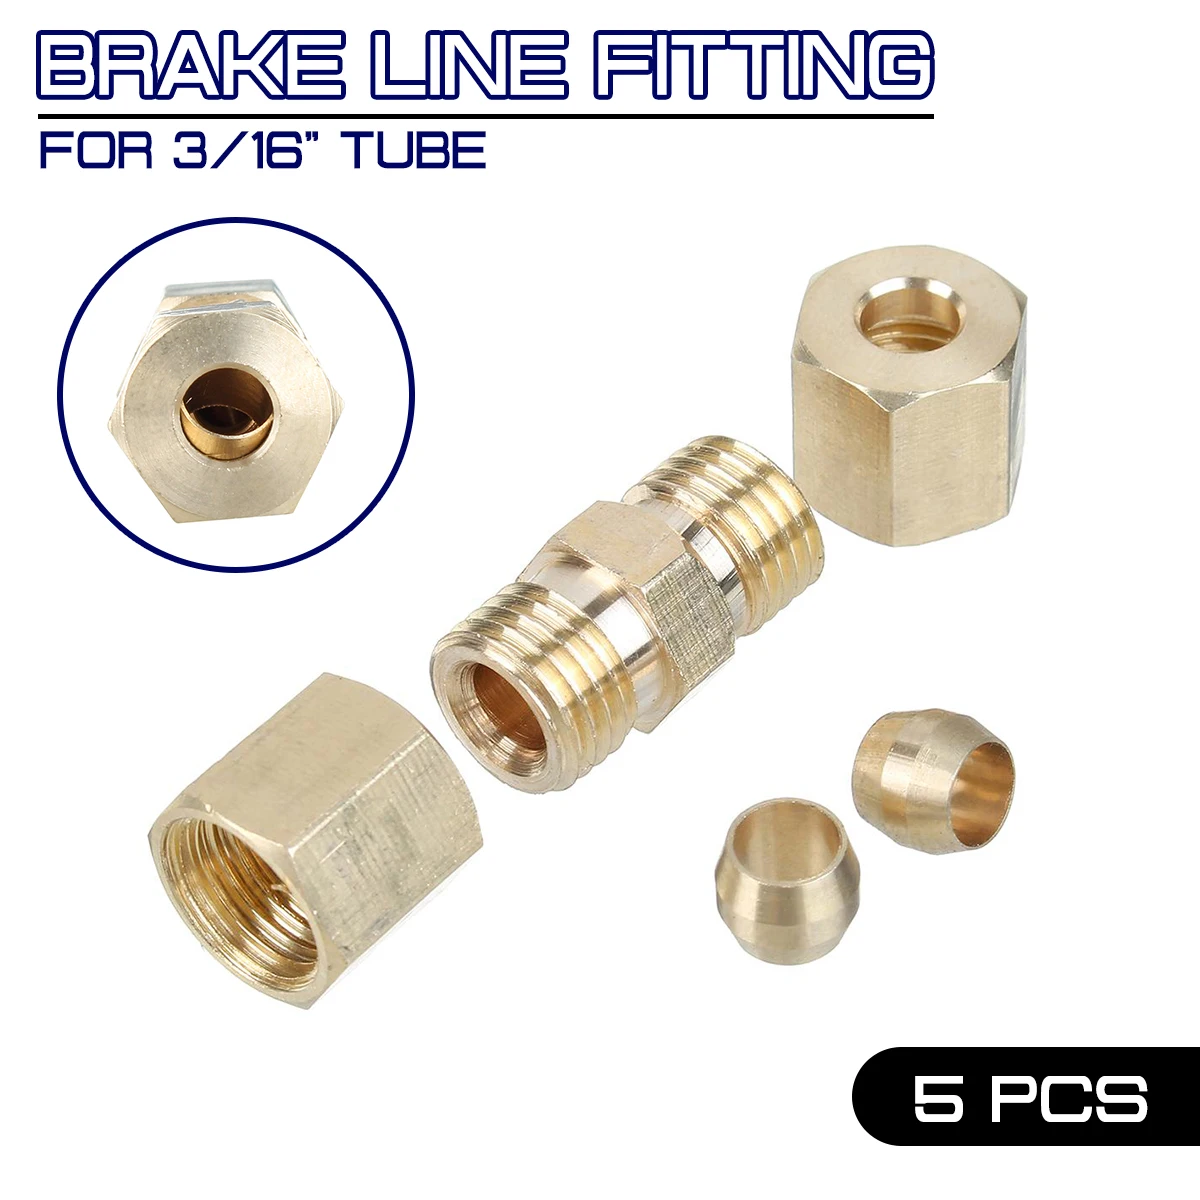 

Hydraulic Brake Lines Union 5PCS 33 x 10mm Brass Straight Reducer Compression Fitting Connector 3/16" OD Tube